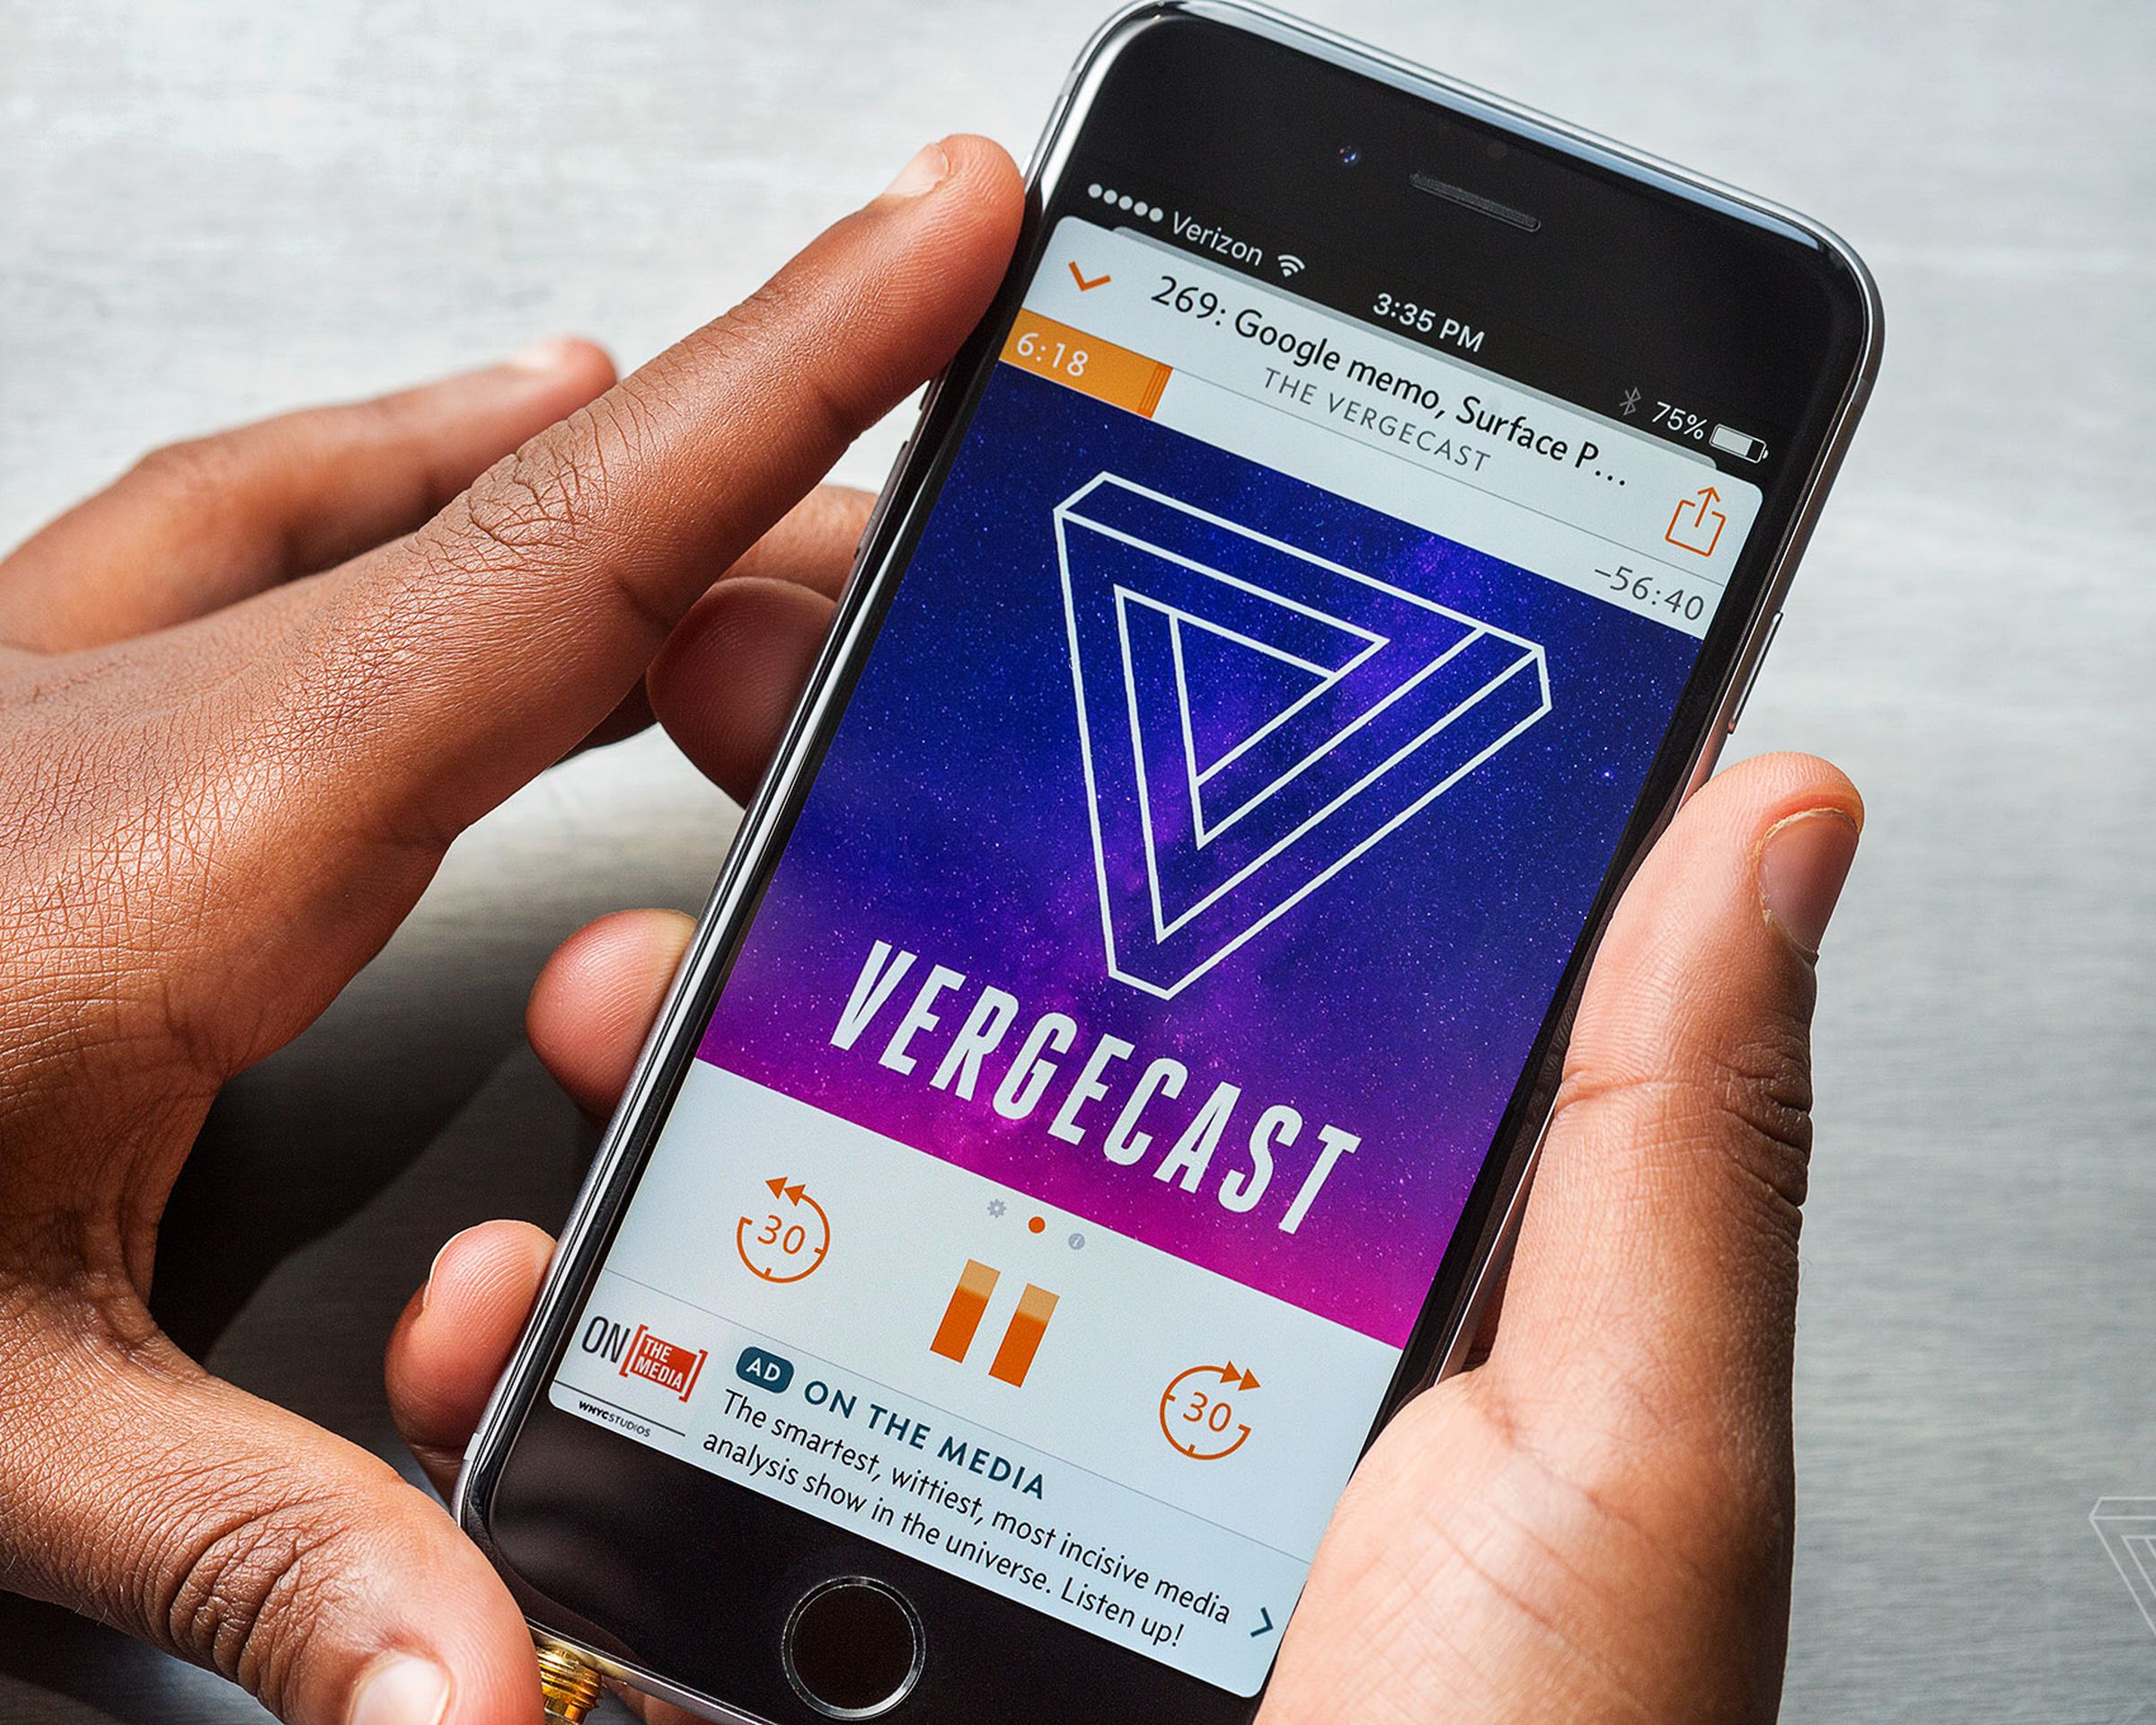 A close-up image of a phone, the Vergecast logo is prominent, and the UI around it is the orange Overcast one.